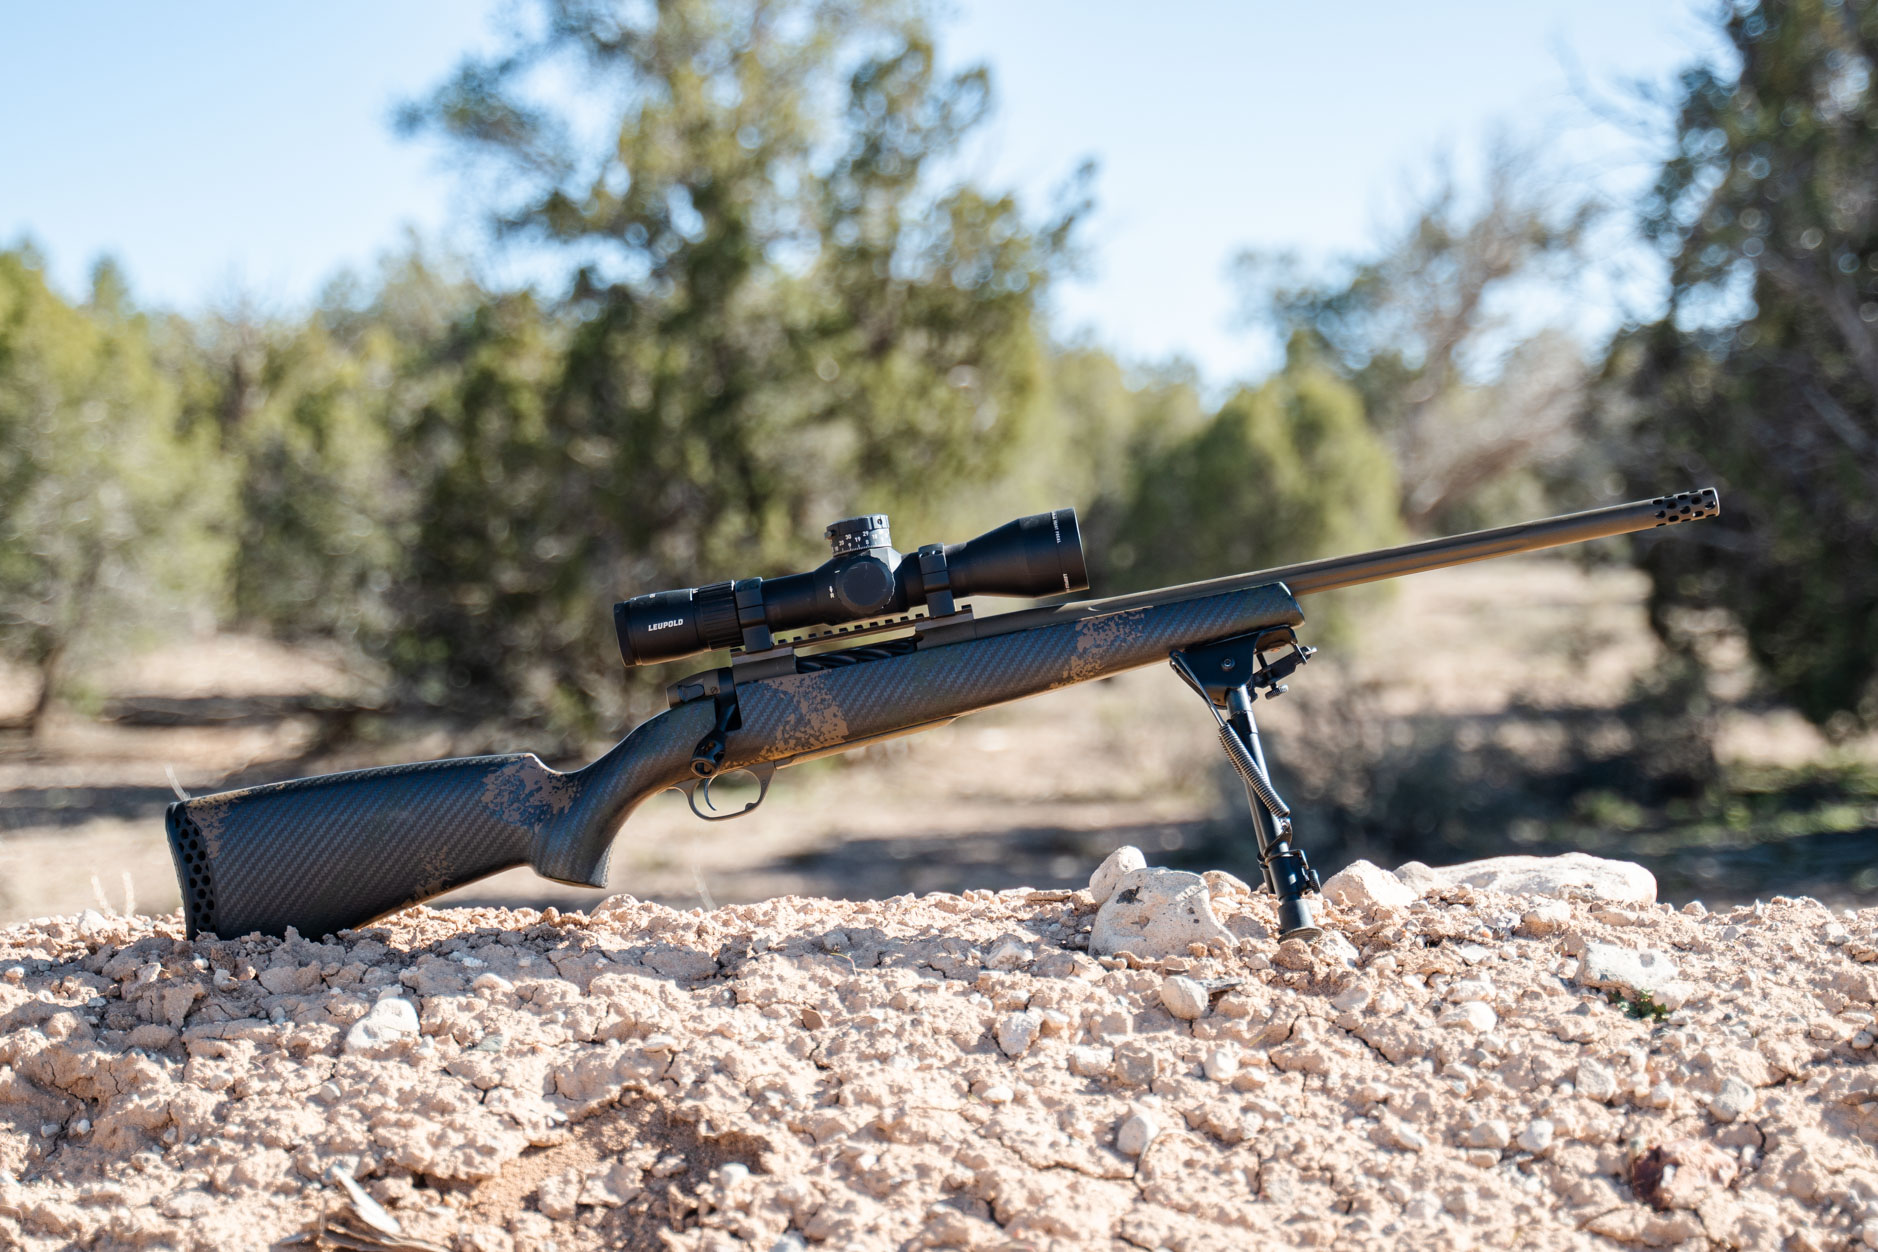 The Weatherby Mark V 2.0 TI is a 5 pound hammer.